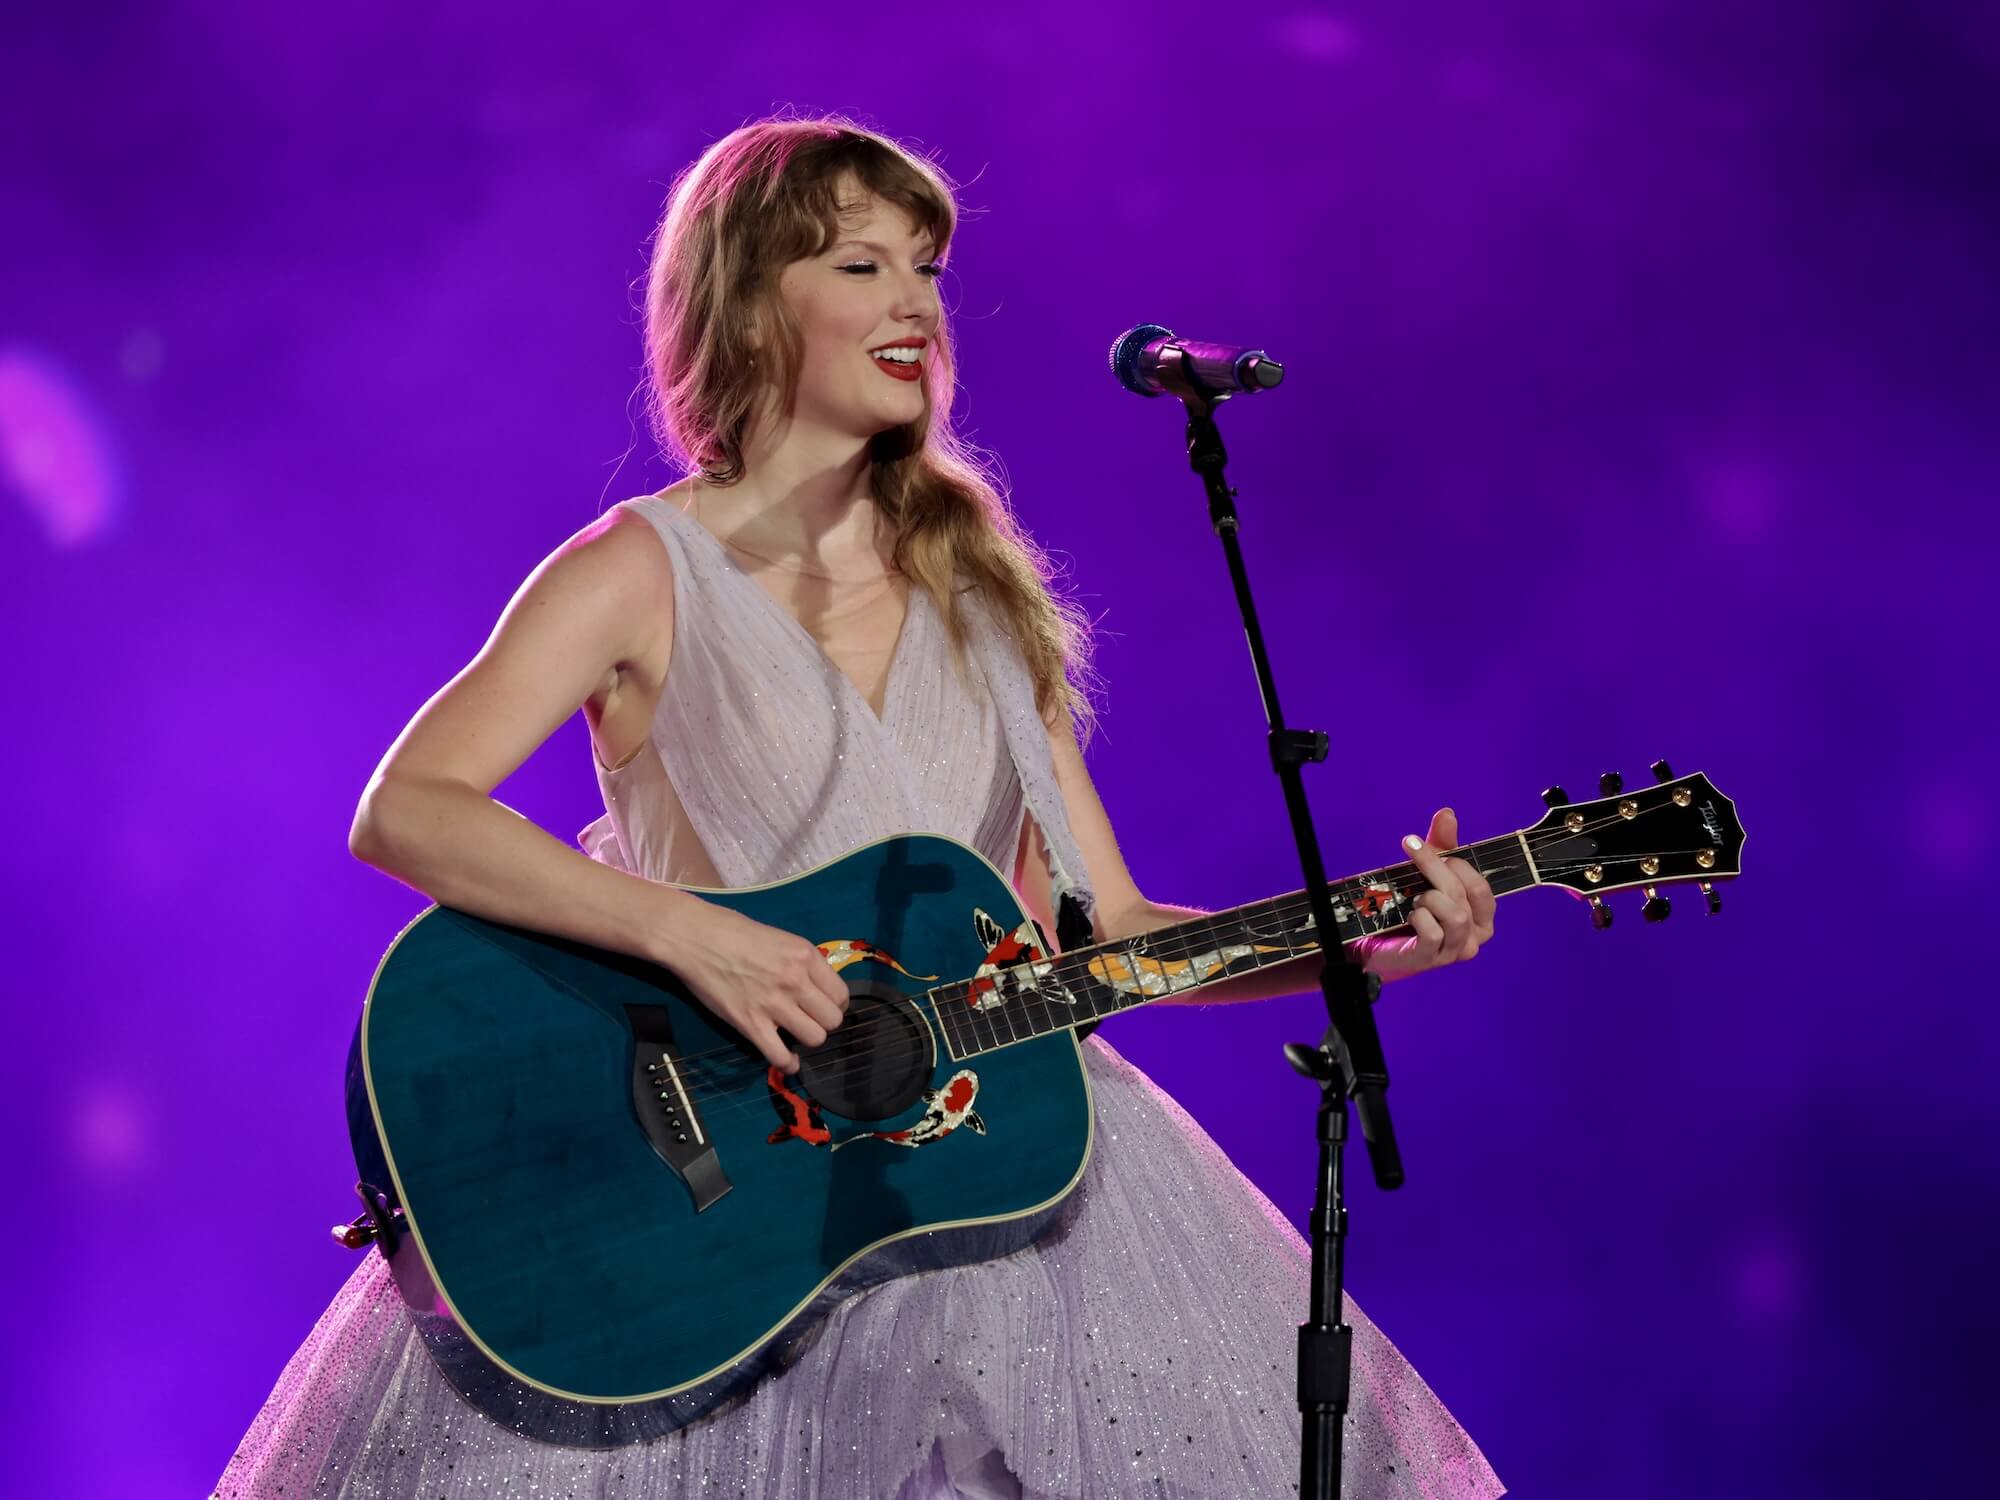 What size guitar does Taylor Swift use?